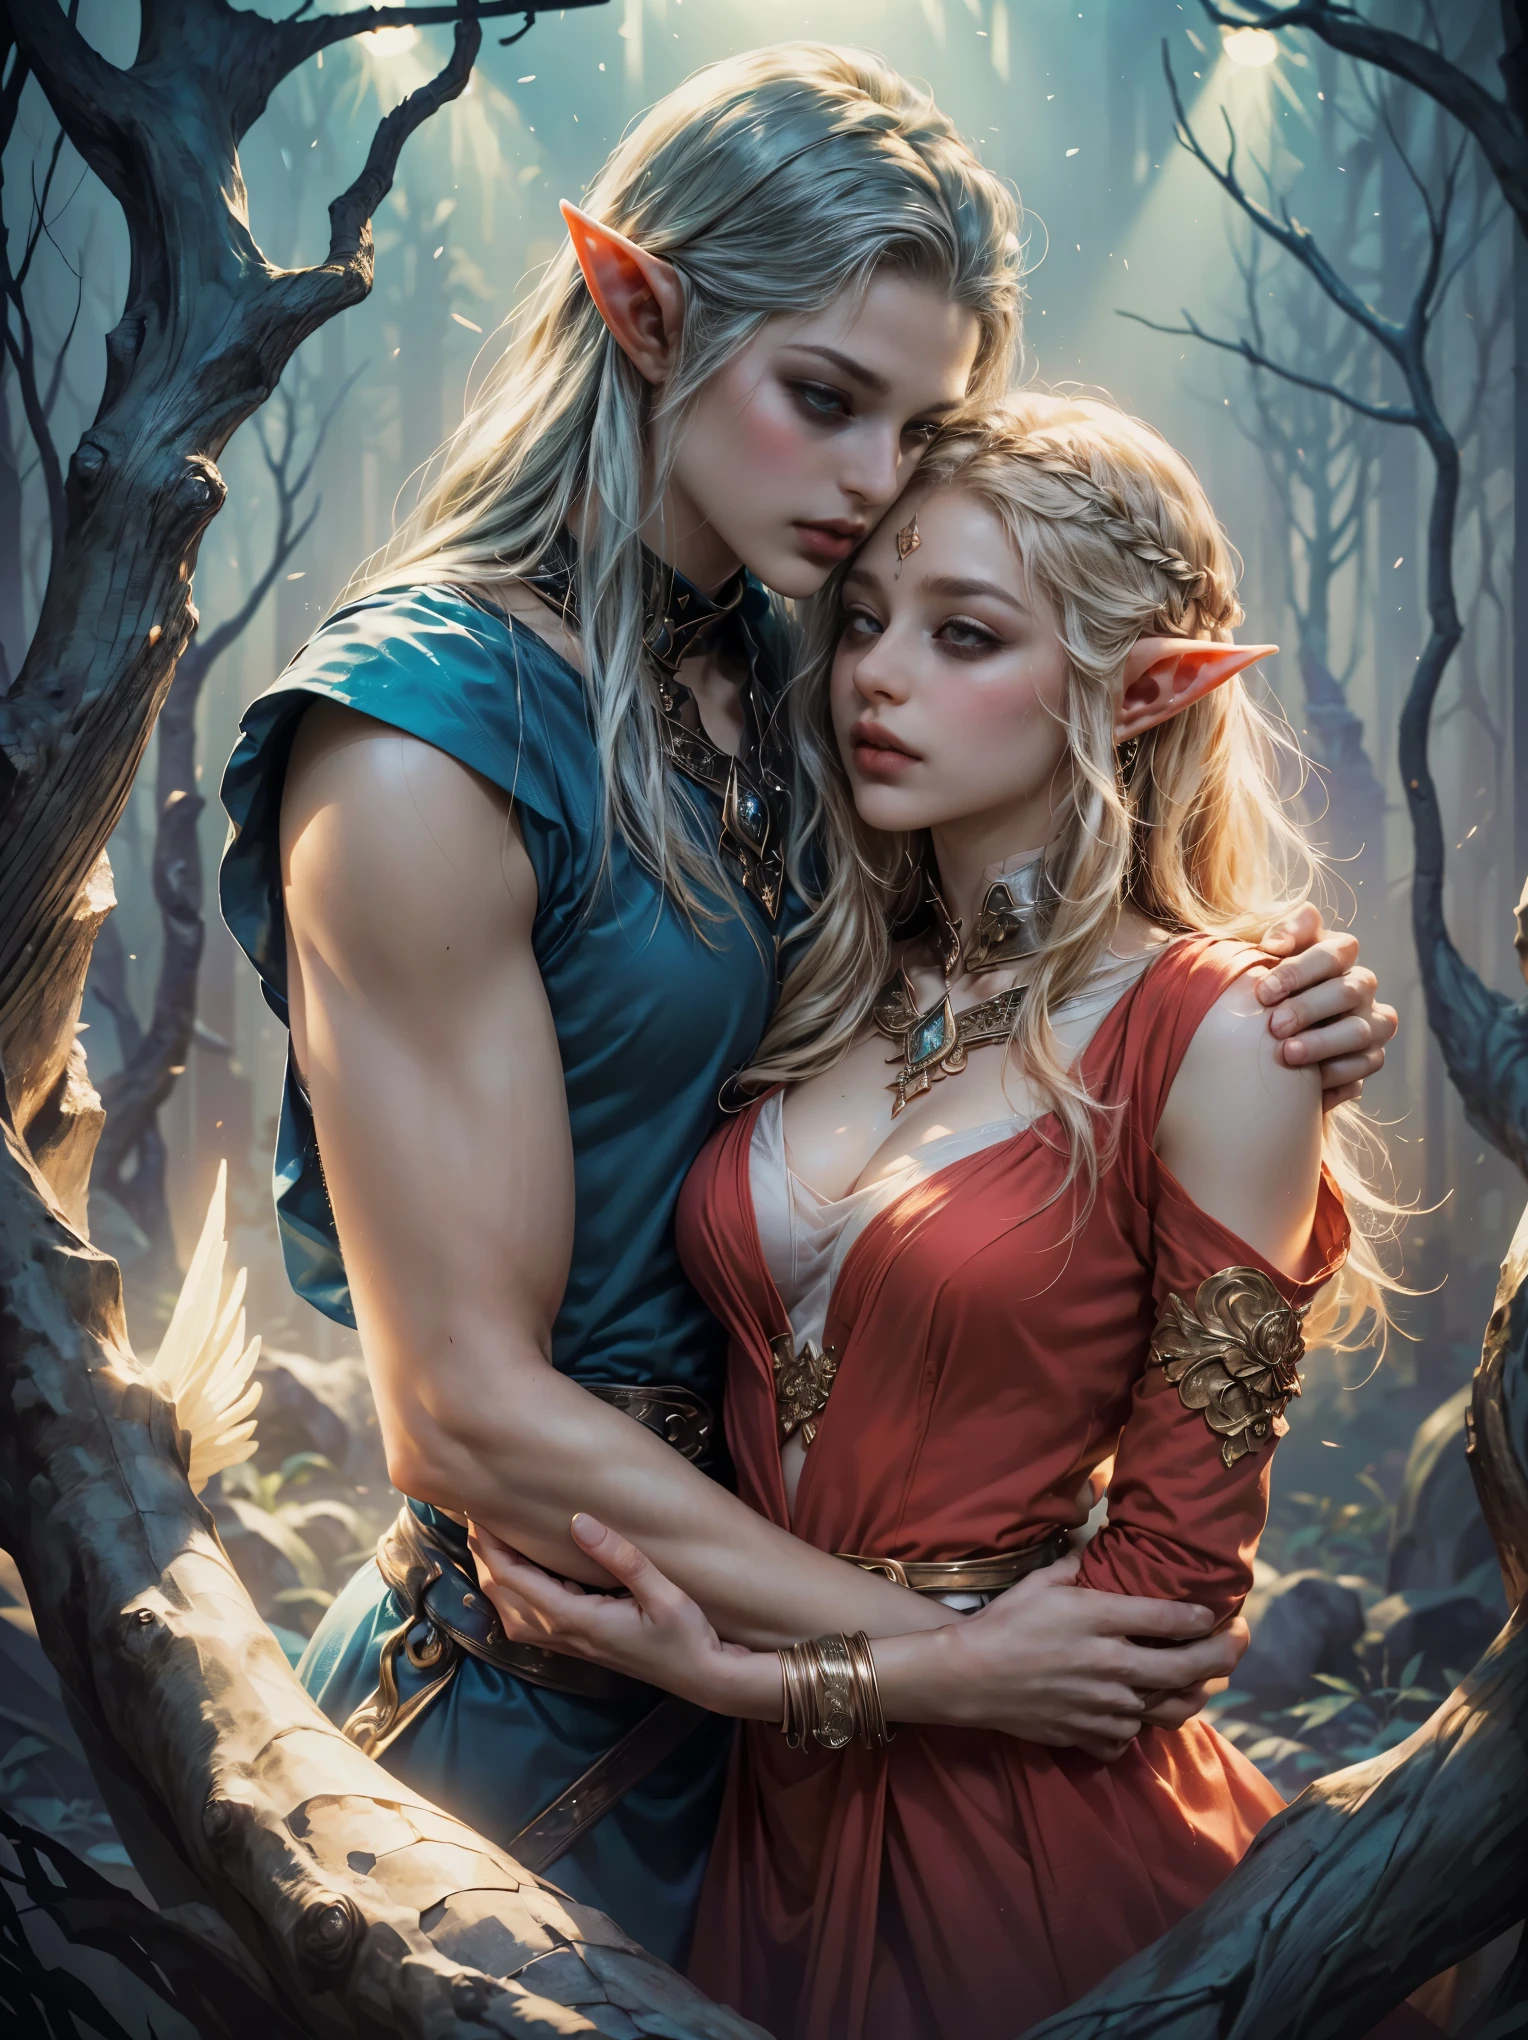 ((of the highest quality, Masterpiece, Maximum image quality, idyllic, Handsome, 8k)), ((pareja joven de elfos hermoso y detallados heterosexual:1.5, hugging and kissing face to face, heterosexual:1.5)), ((Elven clothing, bows and arrows:1.4)), ((pointy elf ears, caHandsome hermoso y detallado ondulado estaba recogido:1.4)), ((Very hot and sexy, powerful elegant, Amazing beauty, perfect proportions, Beautiful body well defined and detailed, Slim body beauty:1.4)), ((detailed skin, detailed eyes:1.4)), cowboy shot, (best ratio: 4 fingers, 1 thumb), Skin is moist and shiny., ((beautiful lighting throughout the body:1.2)), (passionate kiss:1.3), illuminated by a blue light from below, ((epic elven environment epic lighting:1.4)),